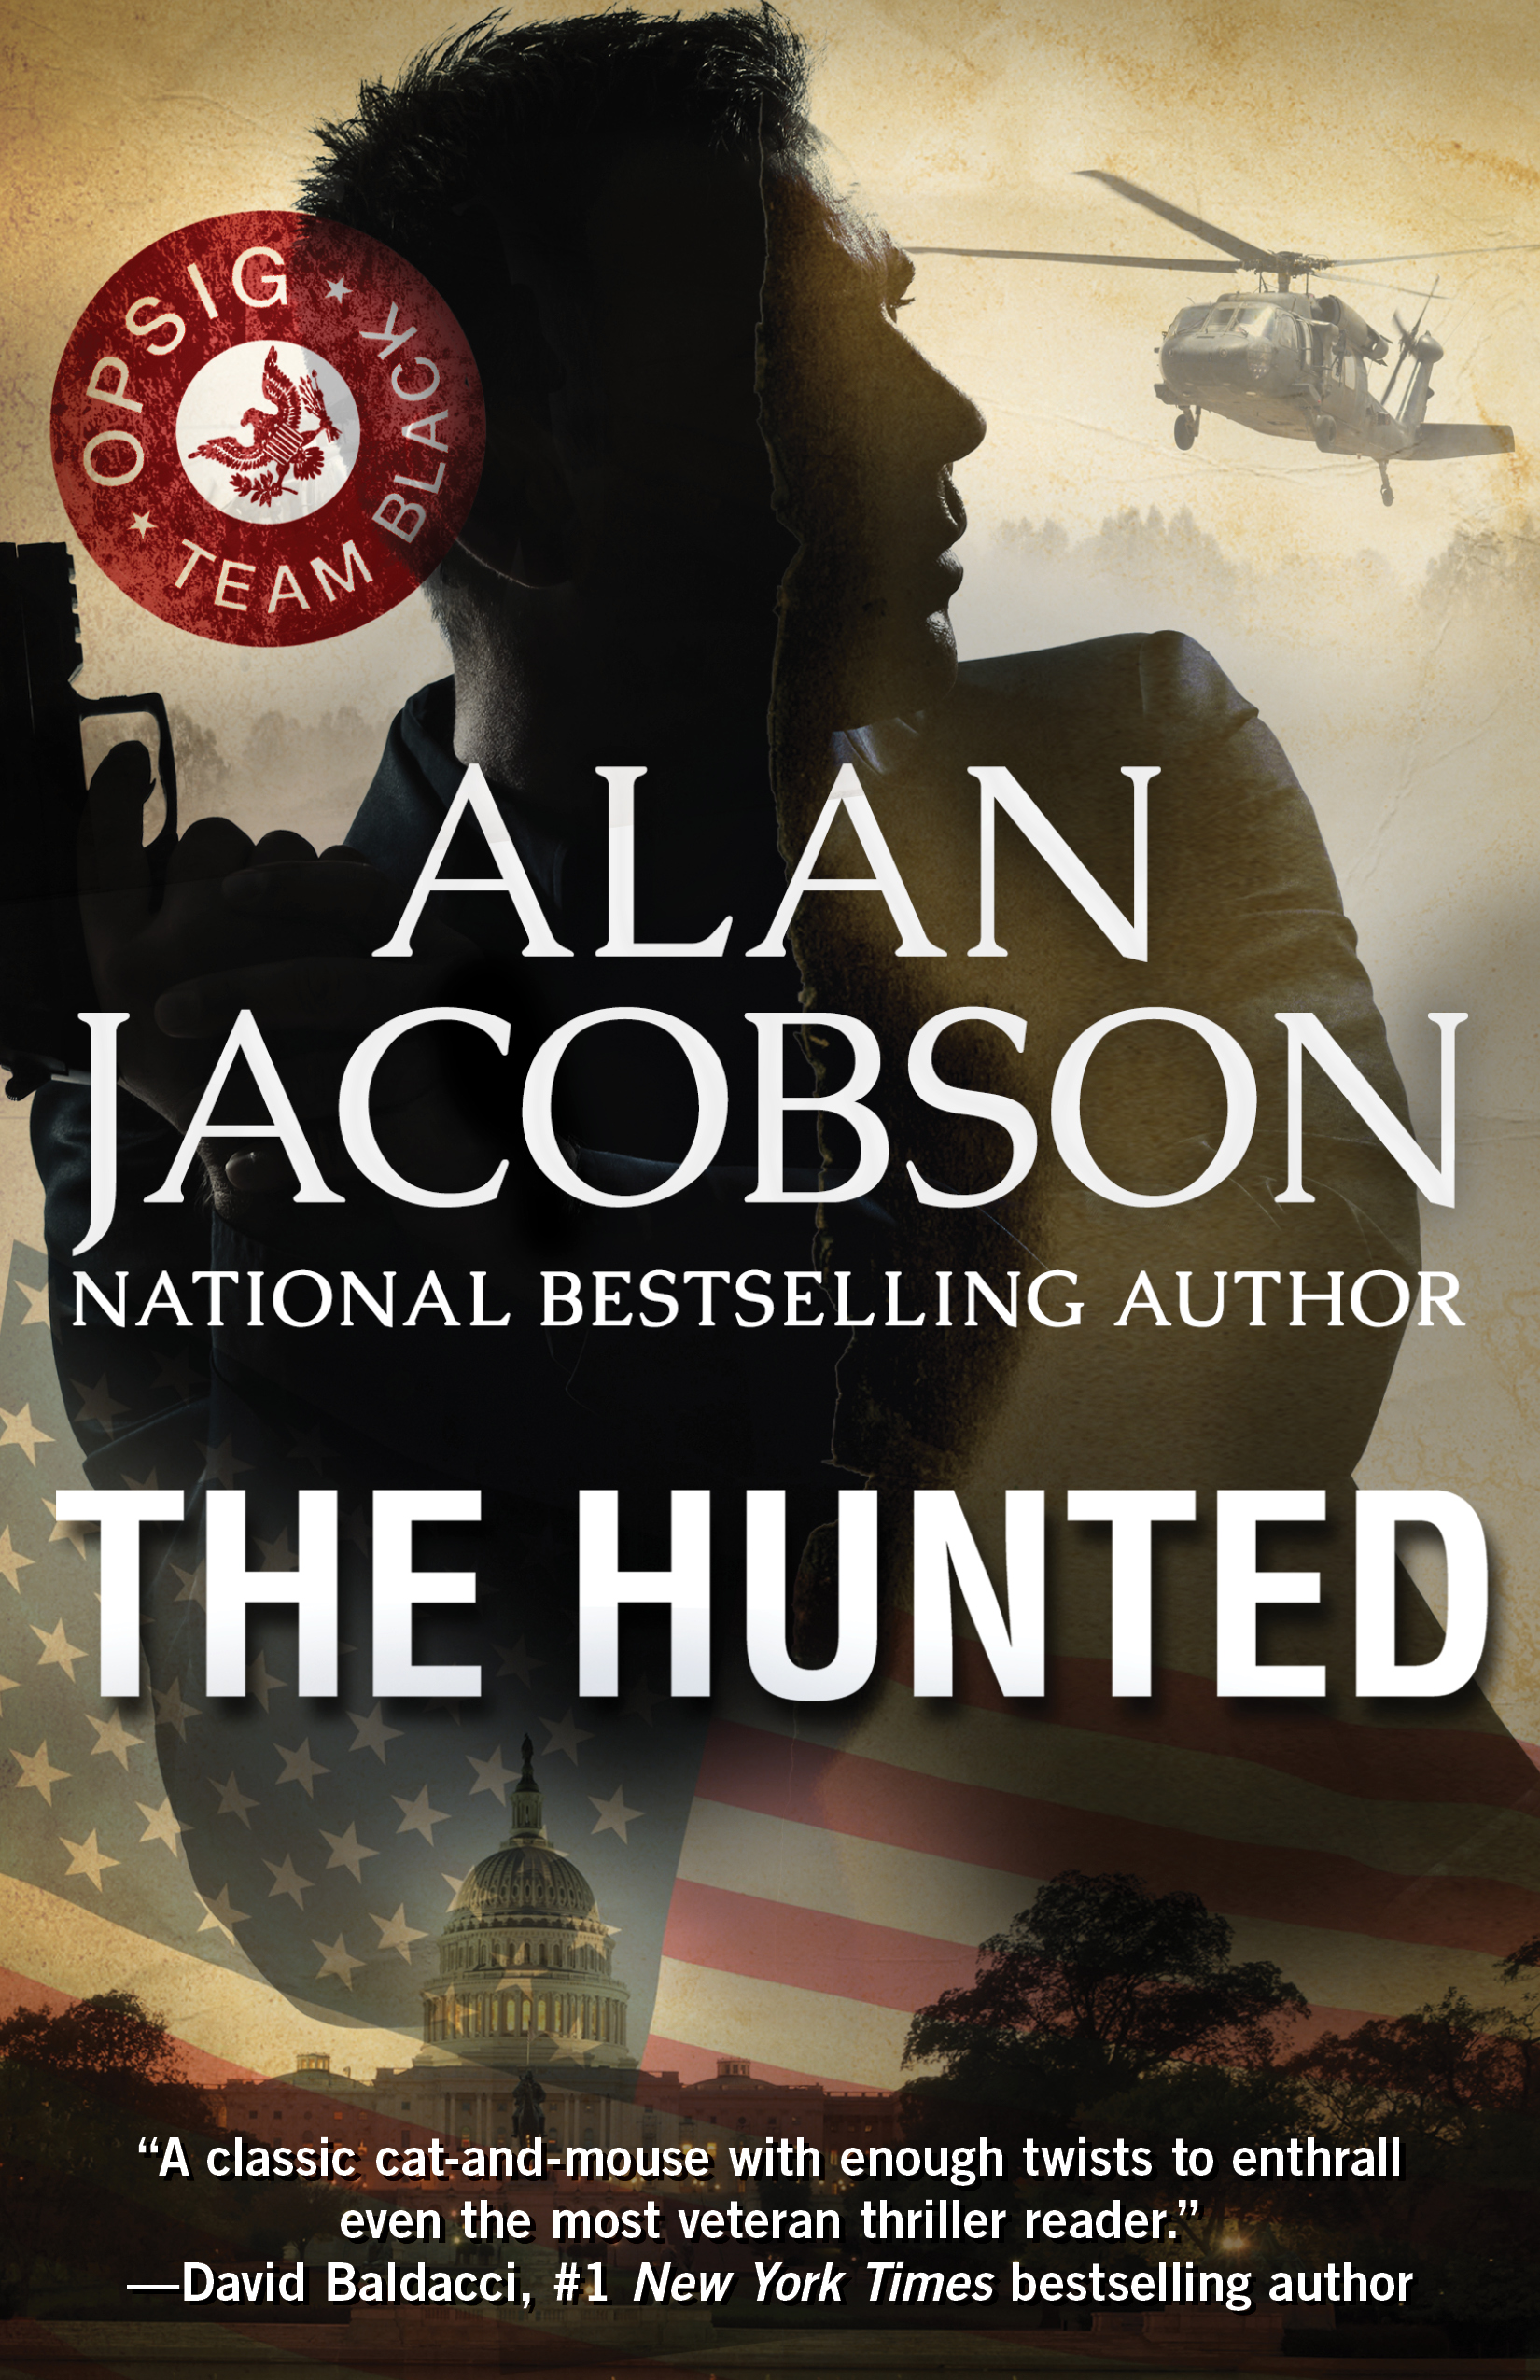 The Hunted excerpt